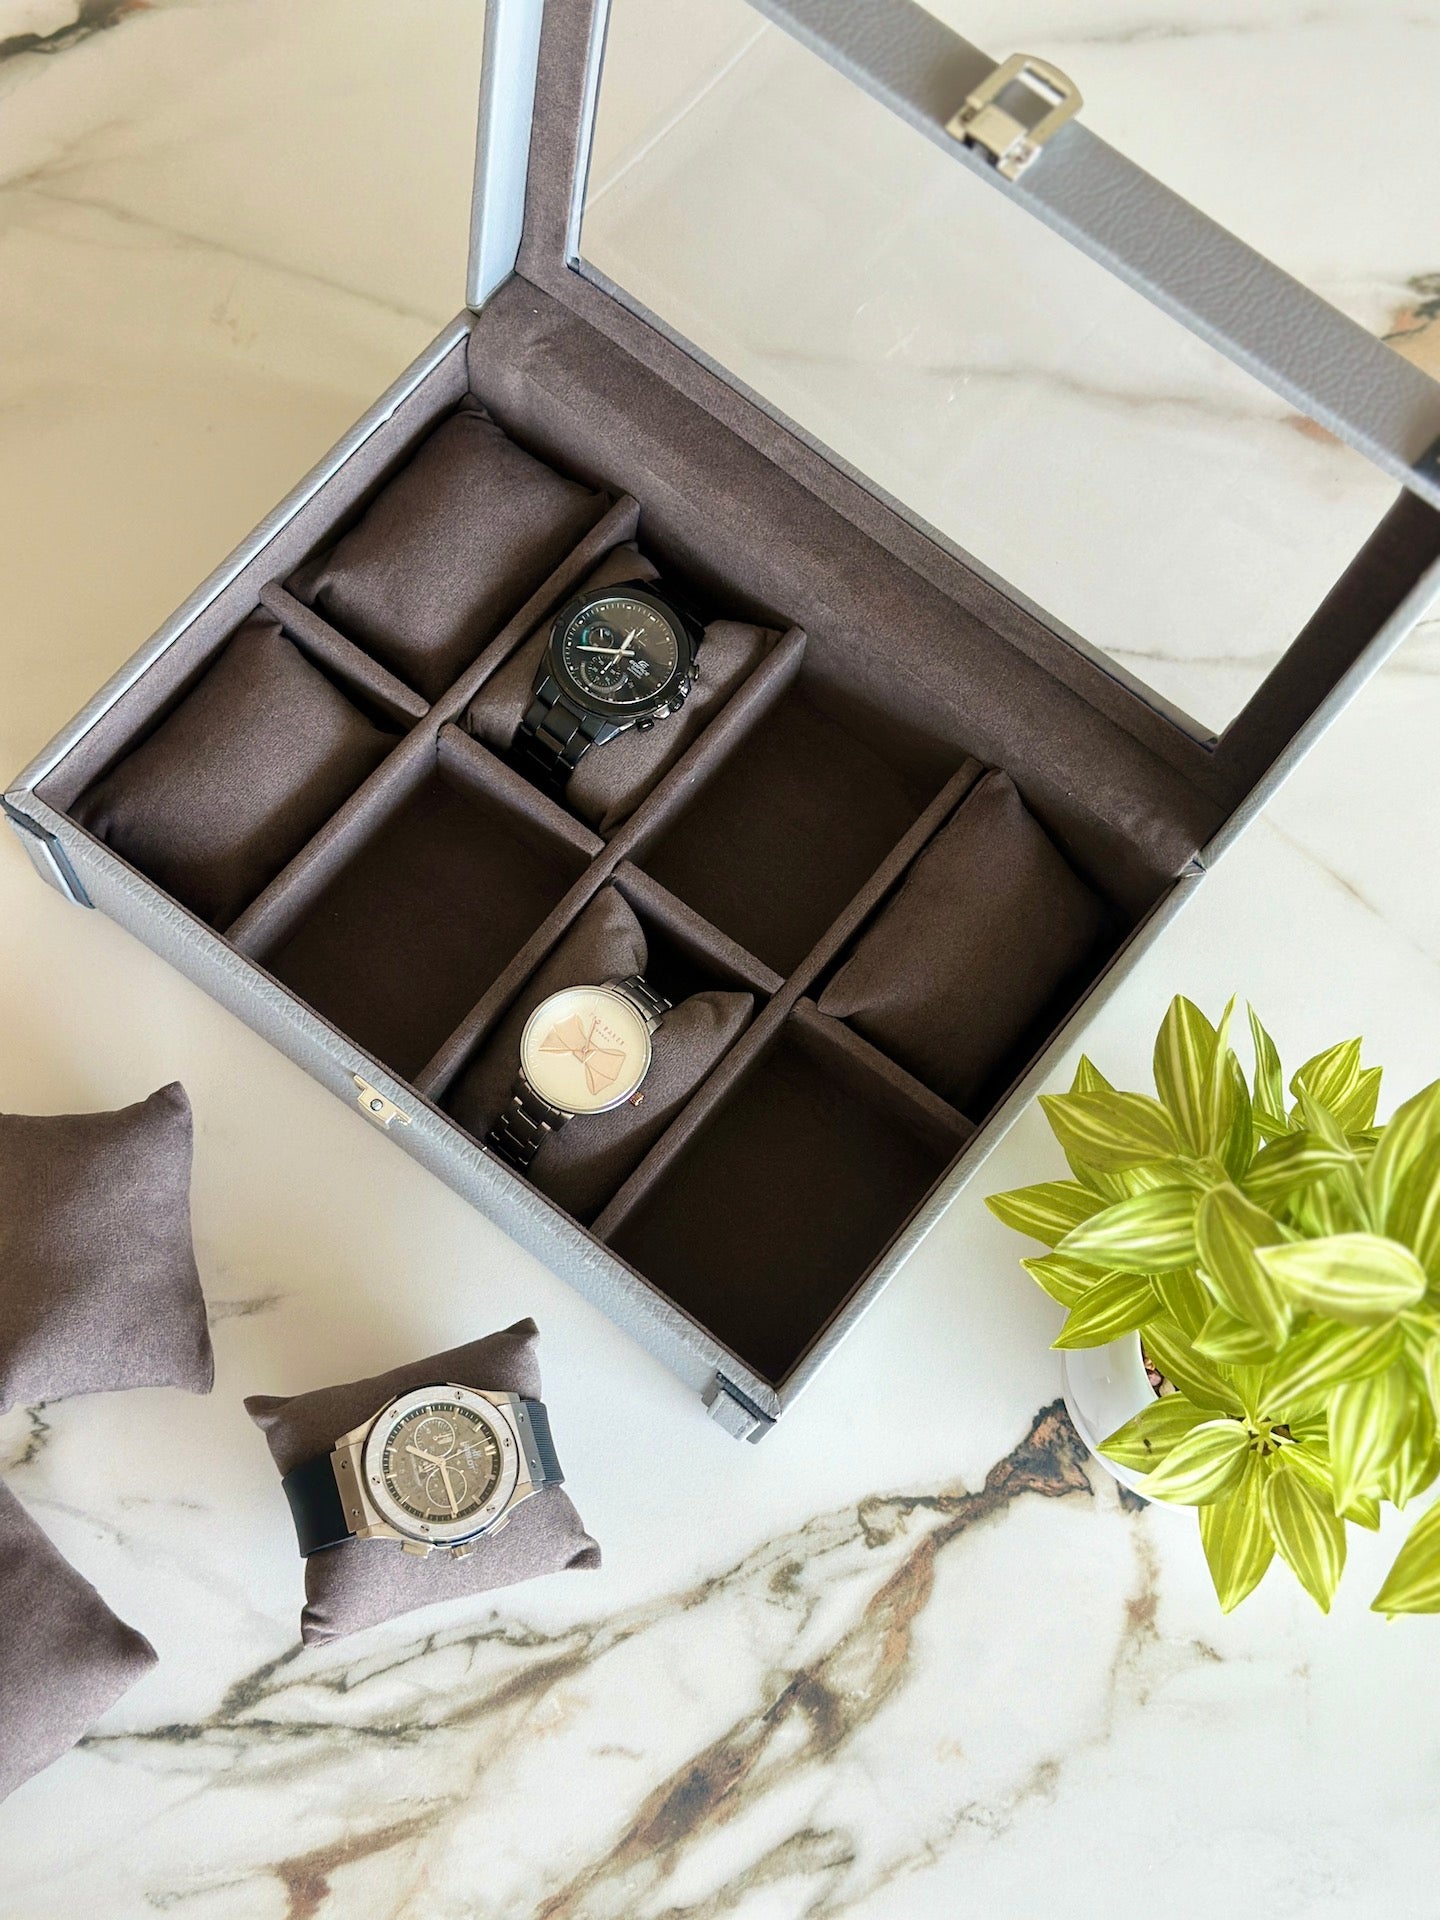 Watch Storage Solutions From the Windup Watch Shop